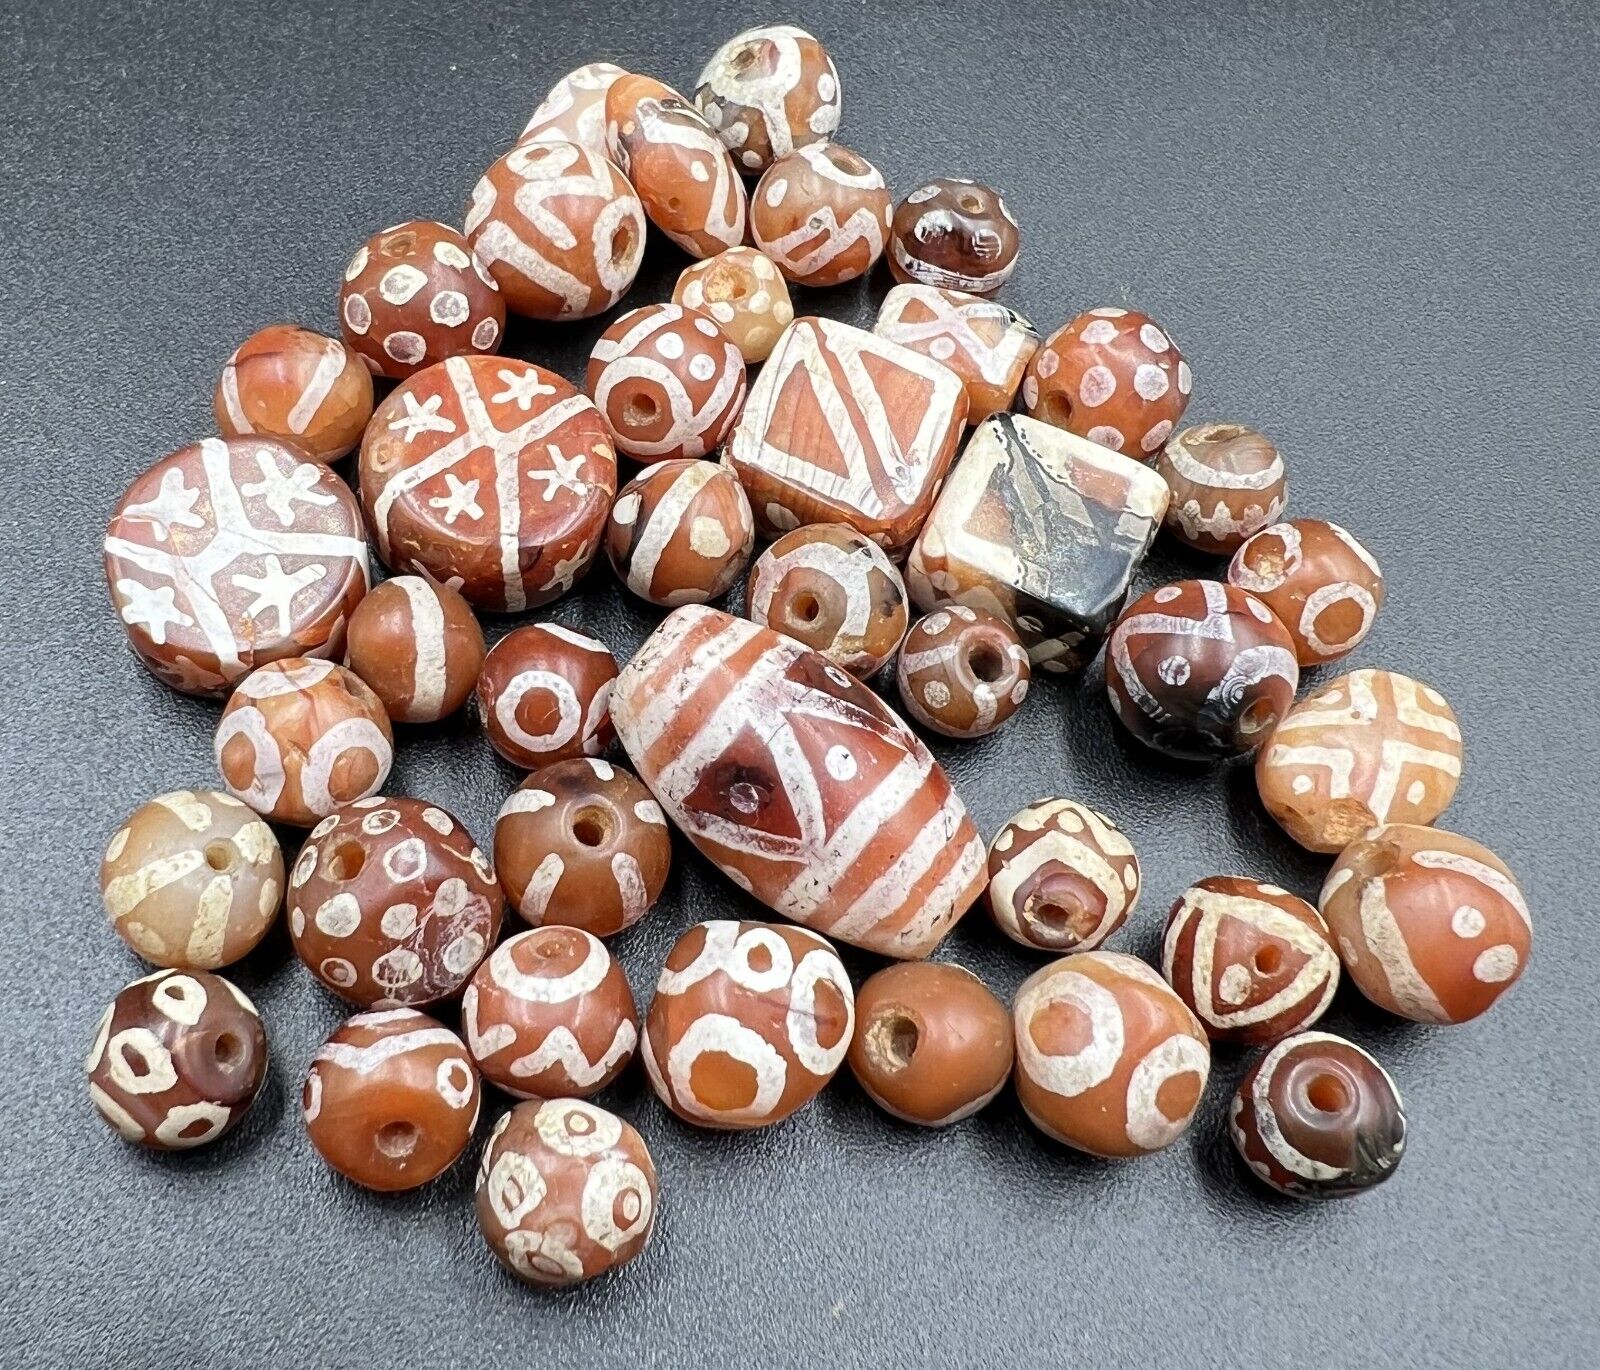 Himalayan Antique Painted Etched Carnelian Agate Stone 41 Beads Necklace